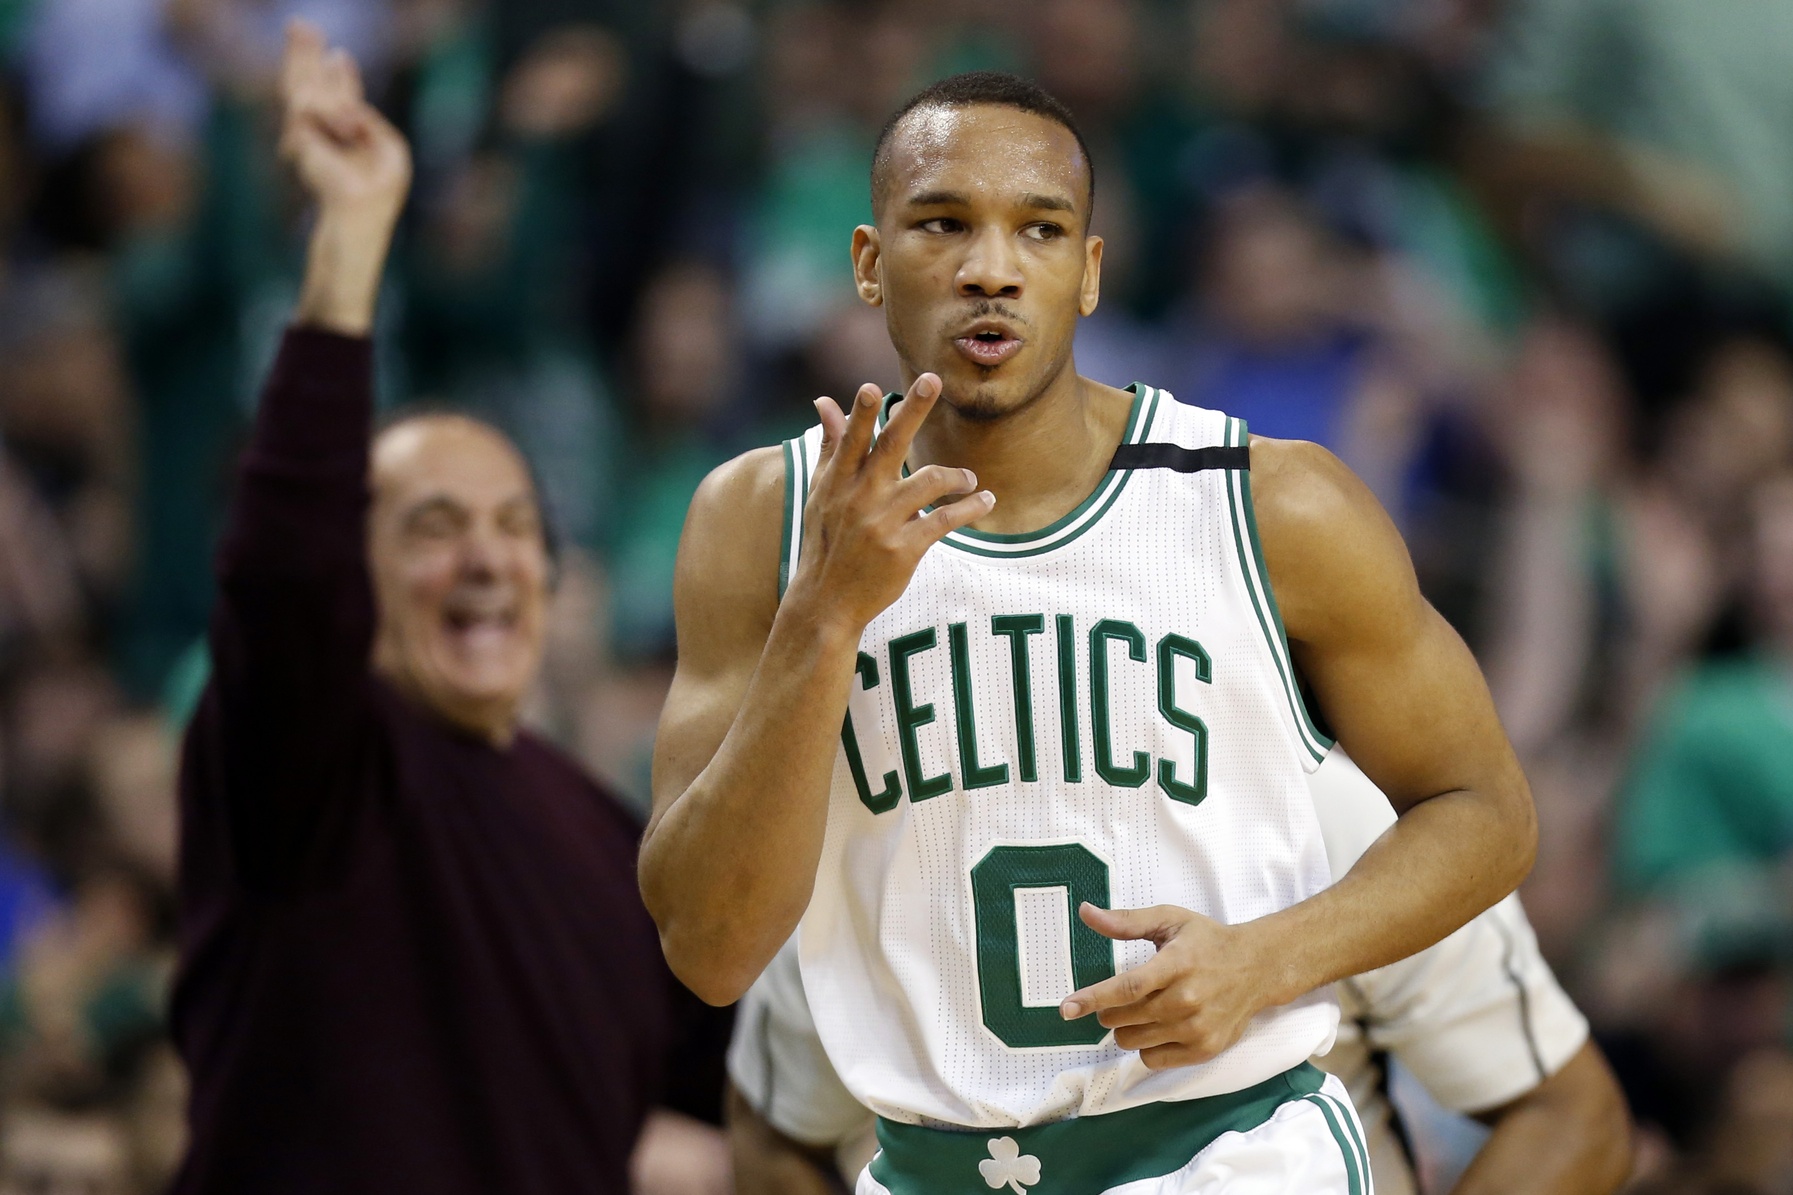 Apr 18, 2017; Boston, MA, USA; Boston Celtics guard Avery Bradley (0) reacts after making a three point basket during the first quarter in game two of the first round of the 2017 NBA Playoffs against the Chicago Bulls at TD Garden. Mandatory Credit: Greg M. Cooper-USA TODAY Sports